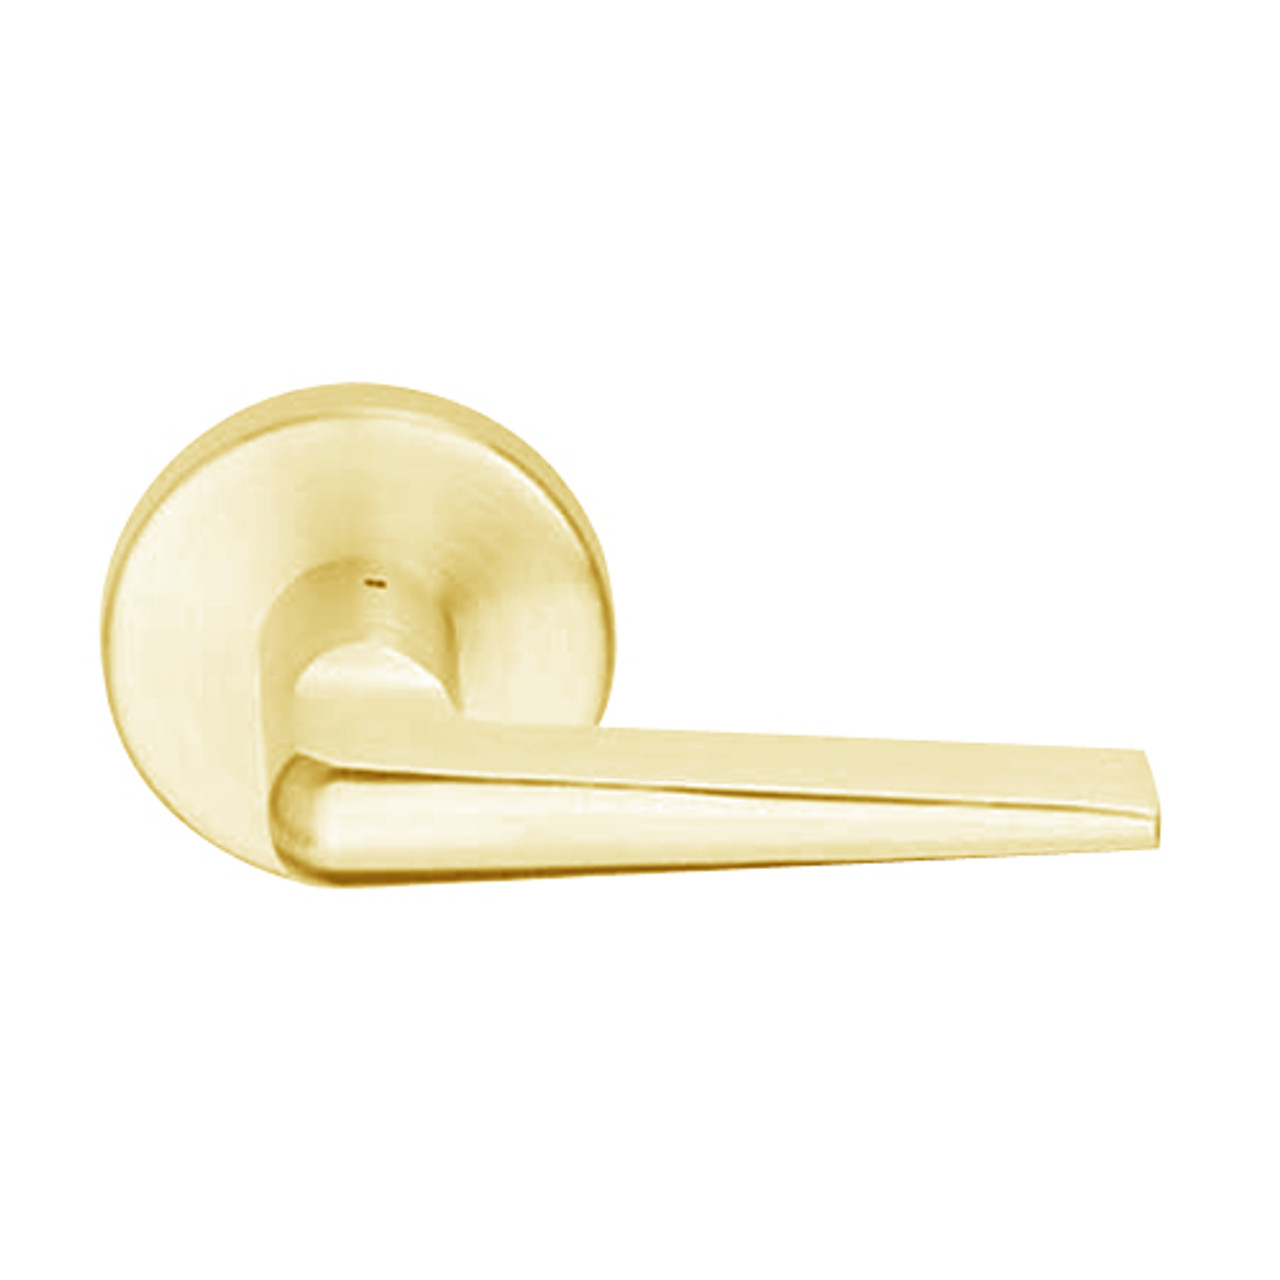 L9050L-05B-605 Schlage L Series Less Cylinder Entrance Commercial Mortise Lock with 05 Cast Lever Design in Bright Brass